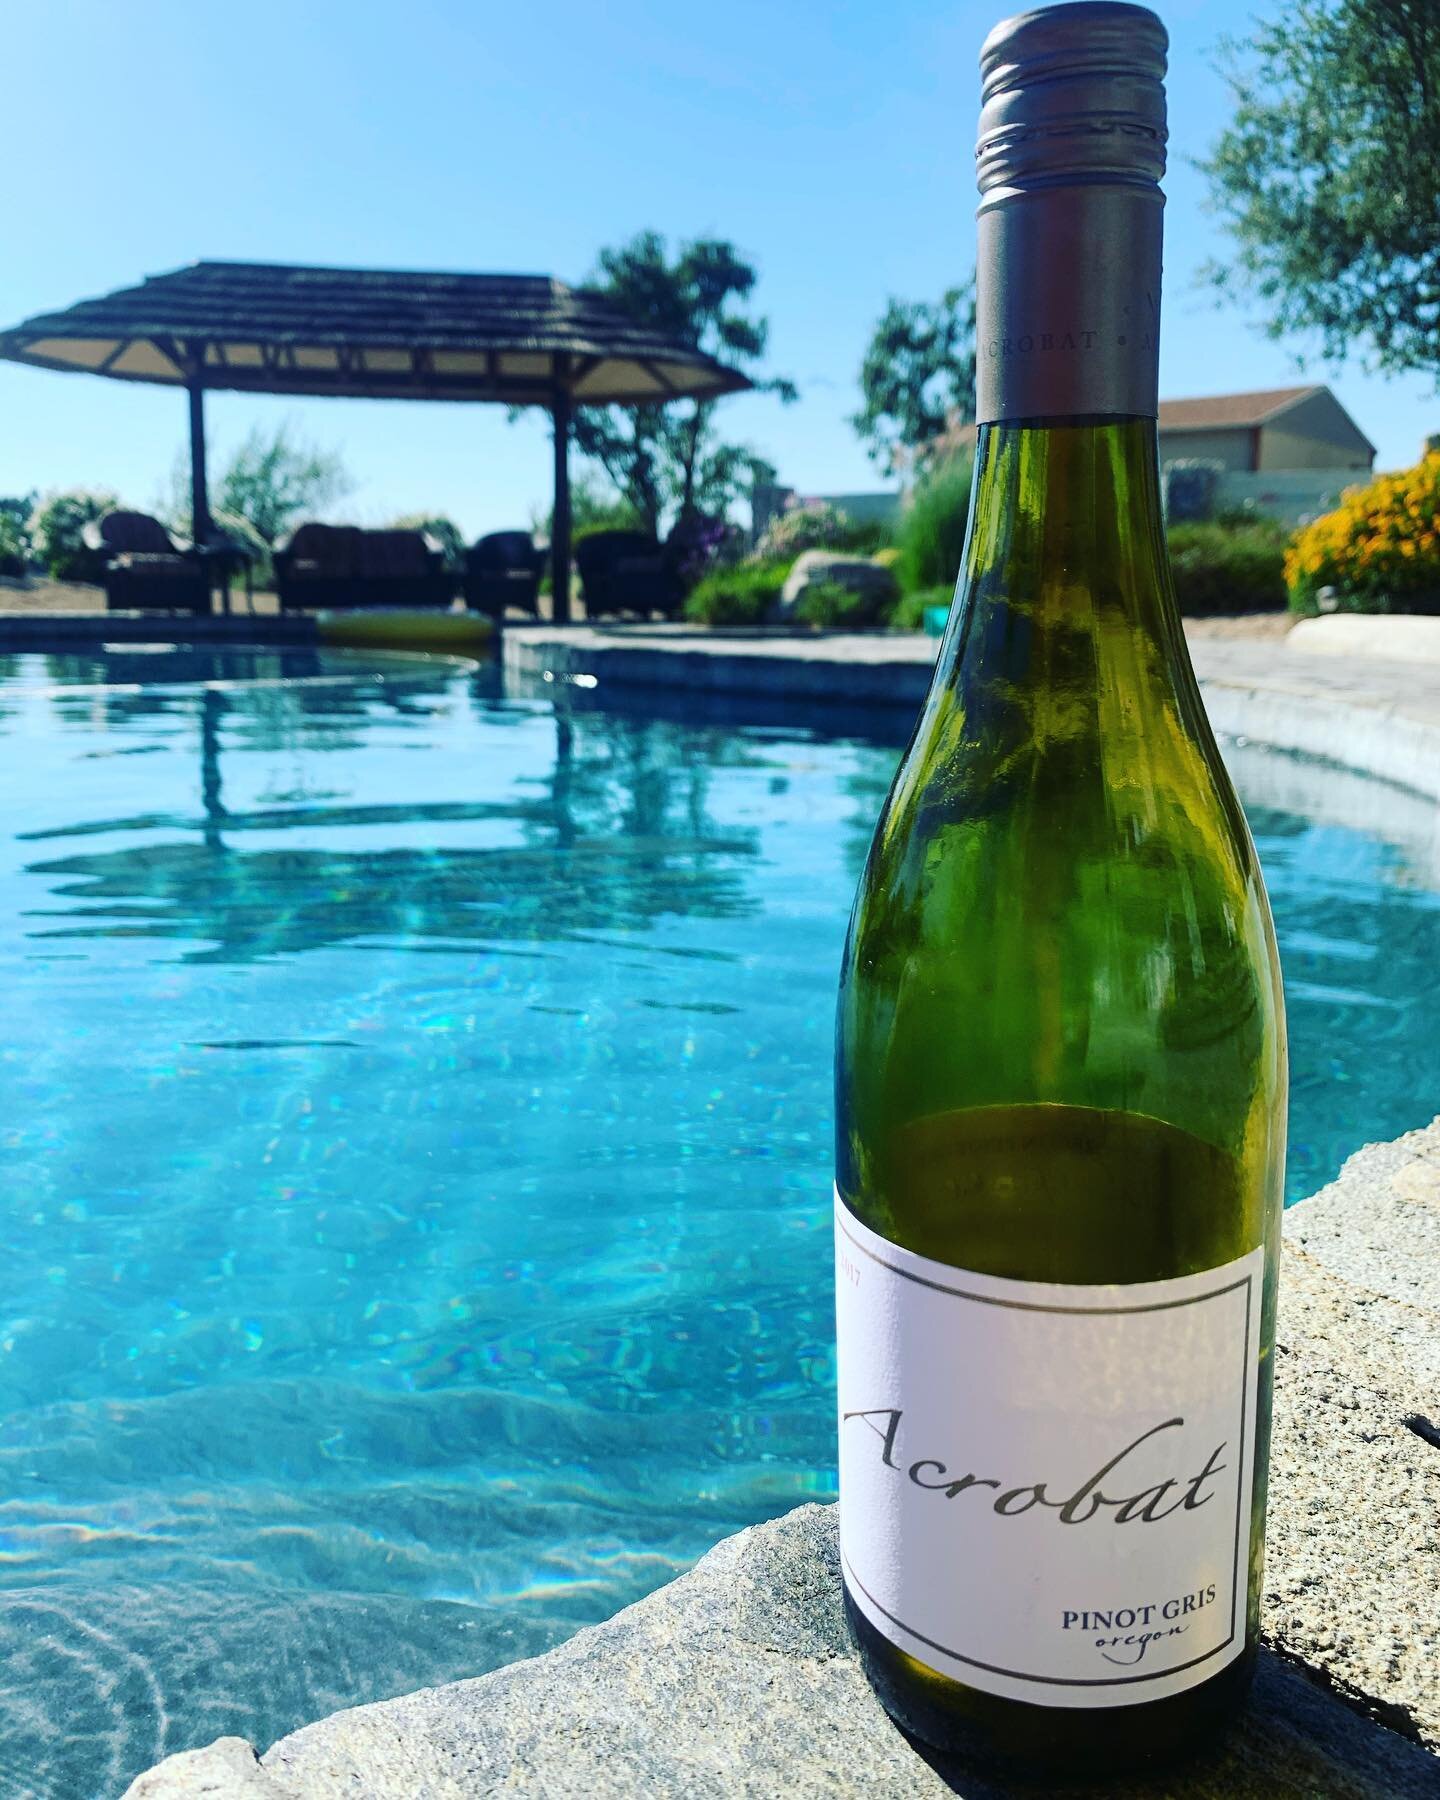 Wine is best served poolside.
If you don&rsquo;t know now you know. 
Let&rsquo;s talk about the 2017 Acrobat Pinot Gris from Oregon. 

This bottle exemplifies how a good bottle can balance high acidity with a silky, sexy smoothness to it. 
The nose g